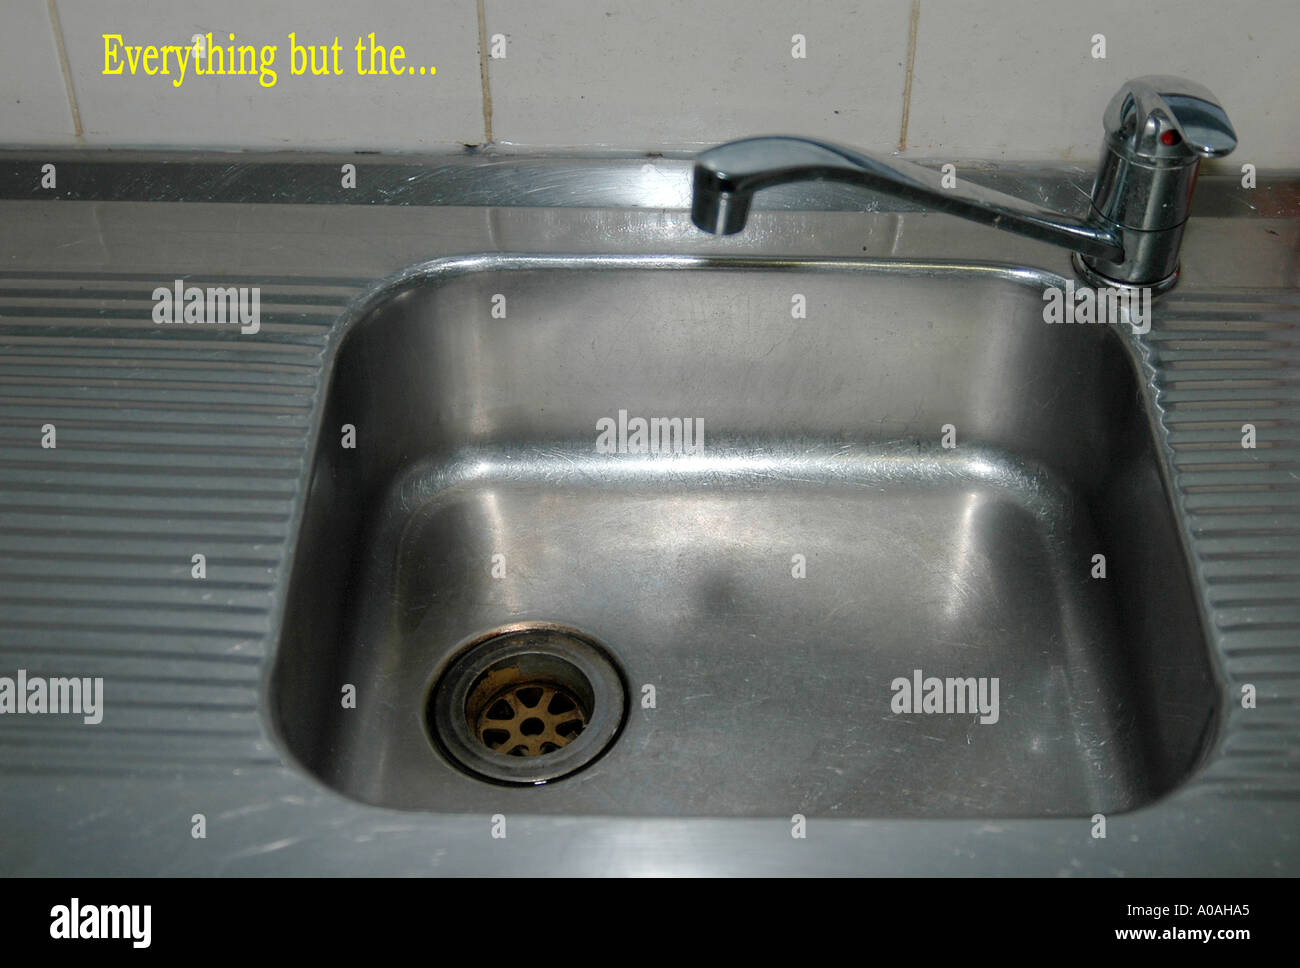 Everything But The Kitchen Sink Stock Photo Alamy